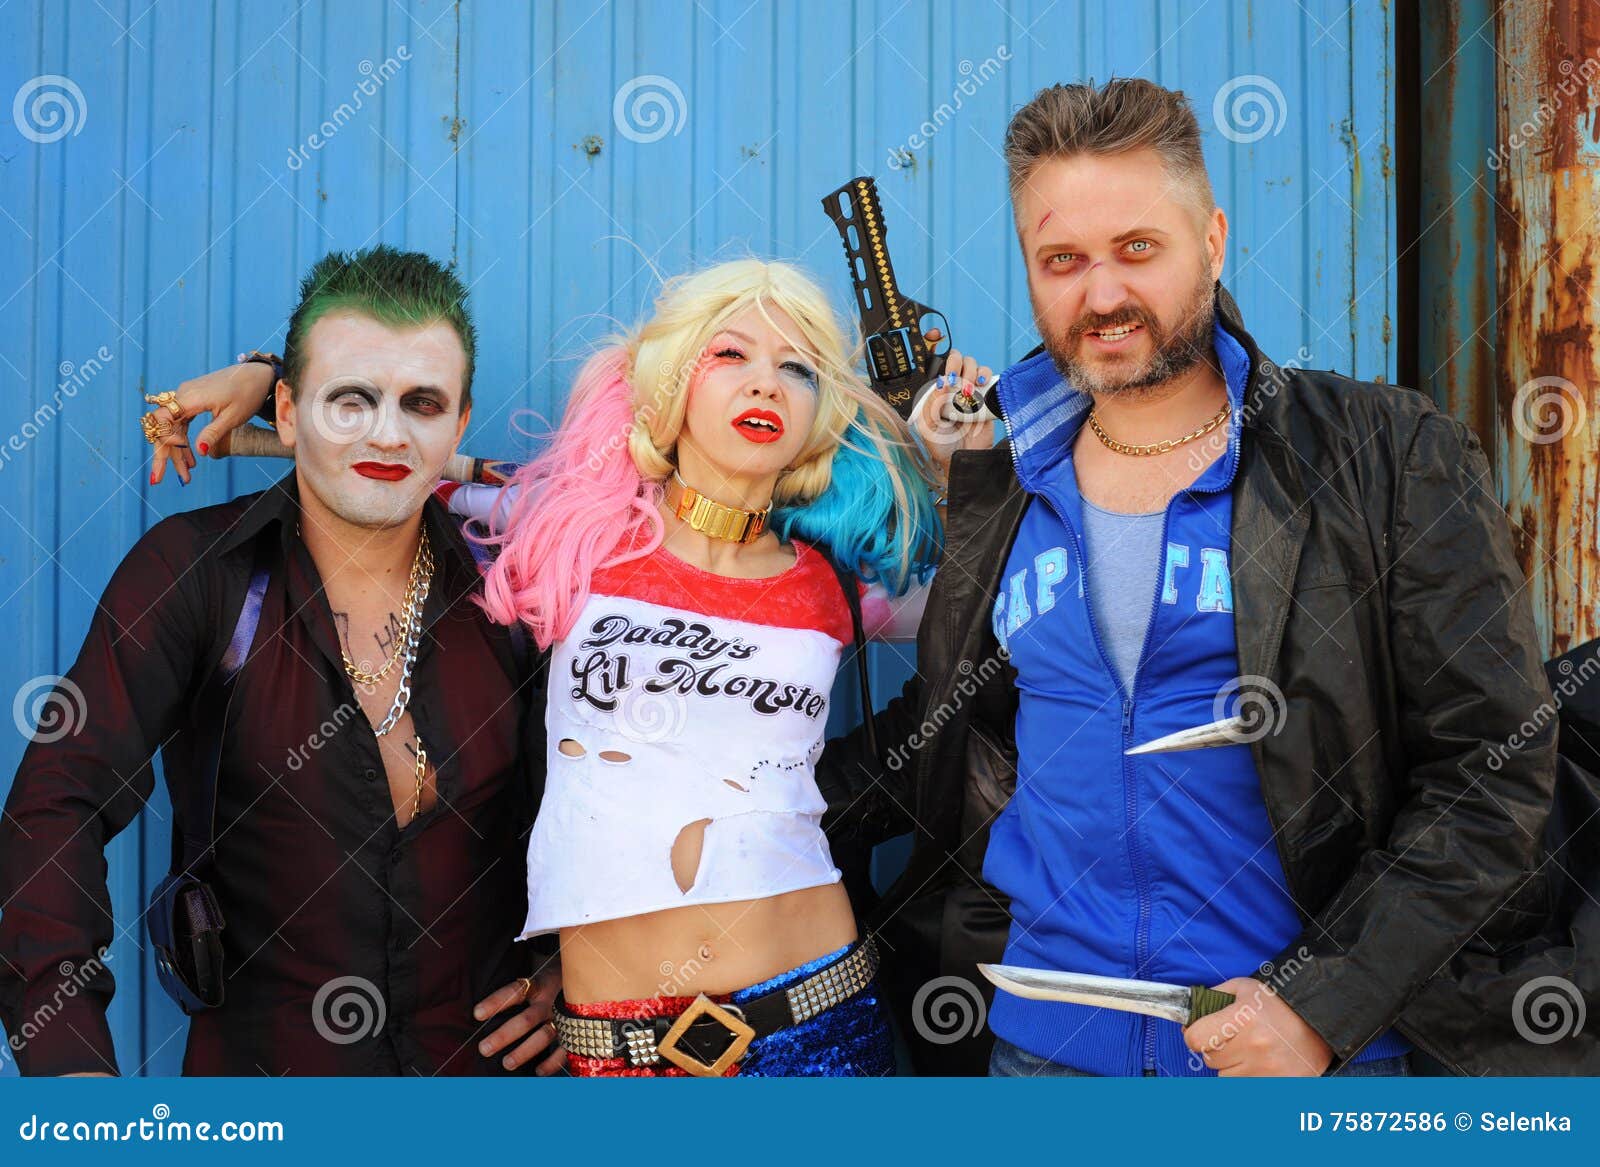 Cosplayer Girl In Harley Quinn Costume And Cosplayer Men ...